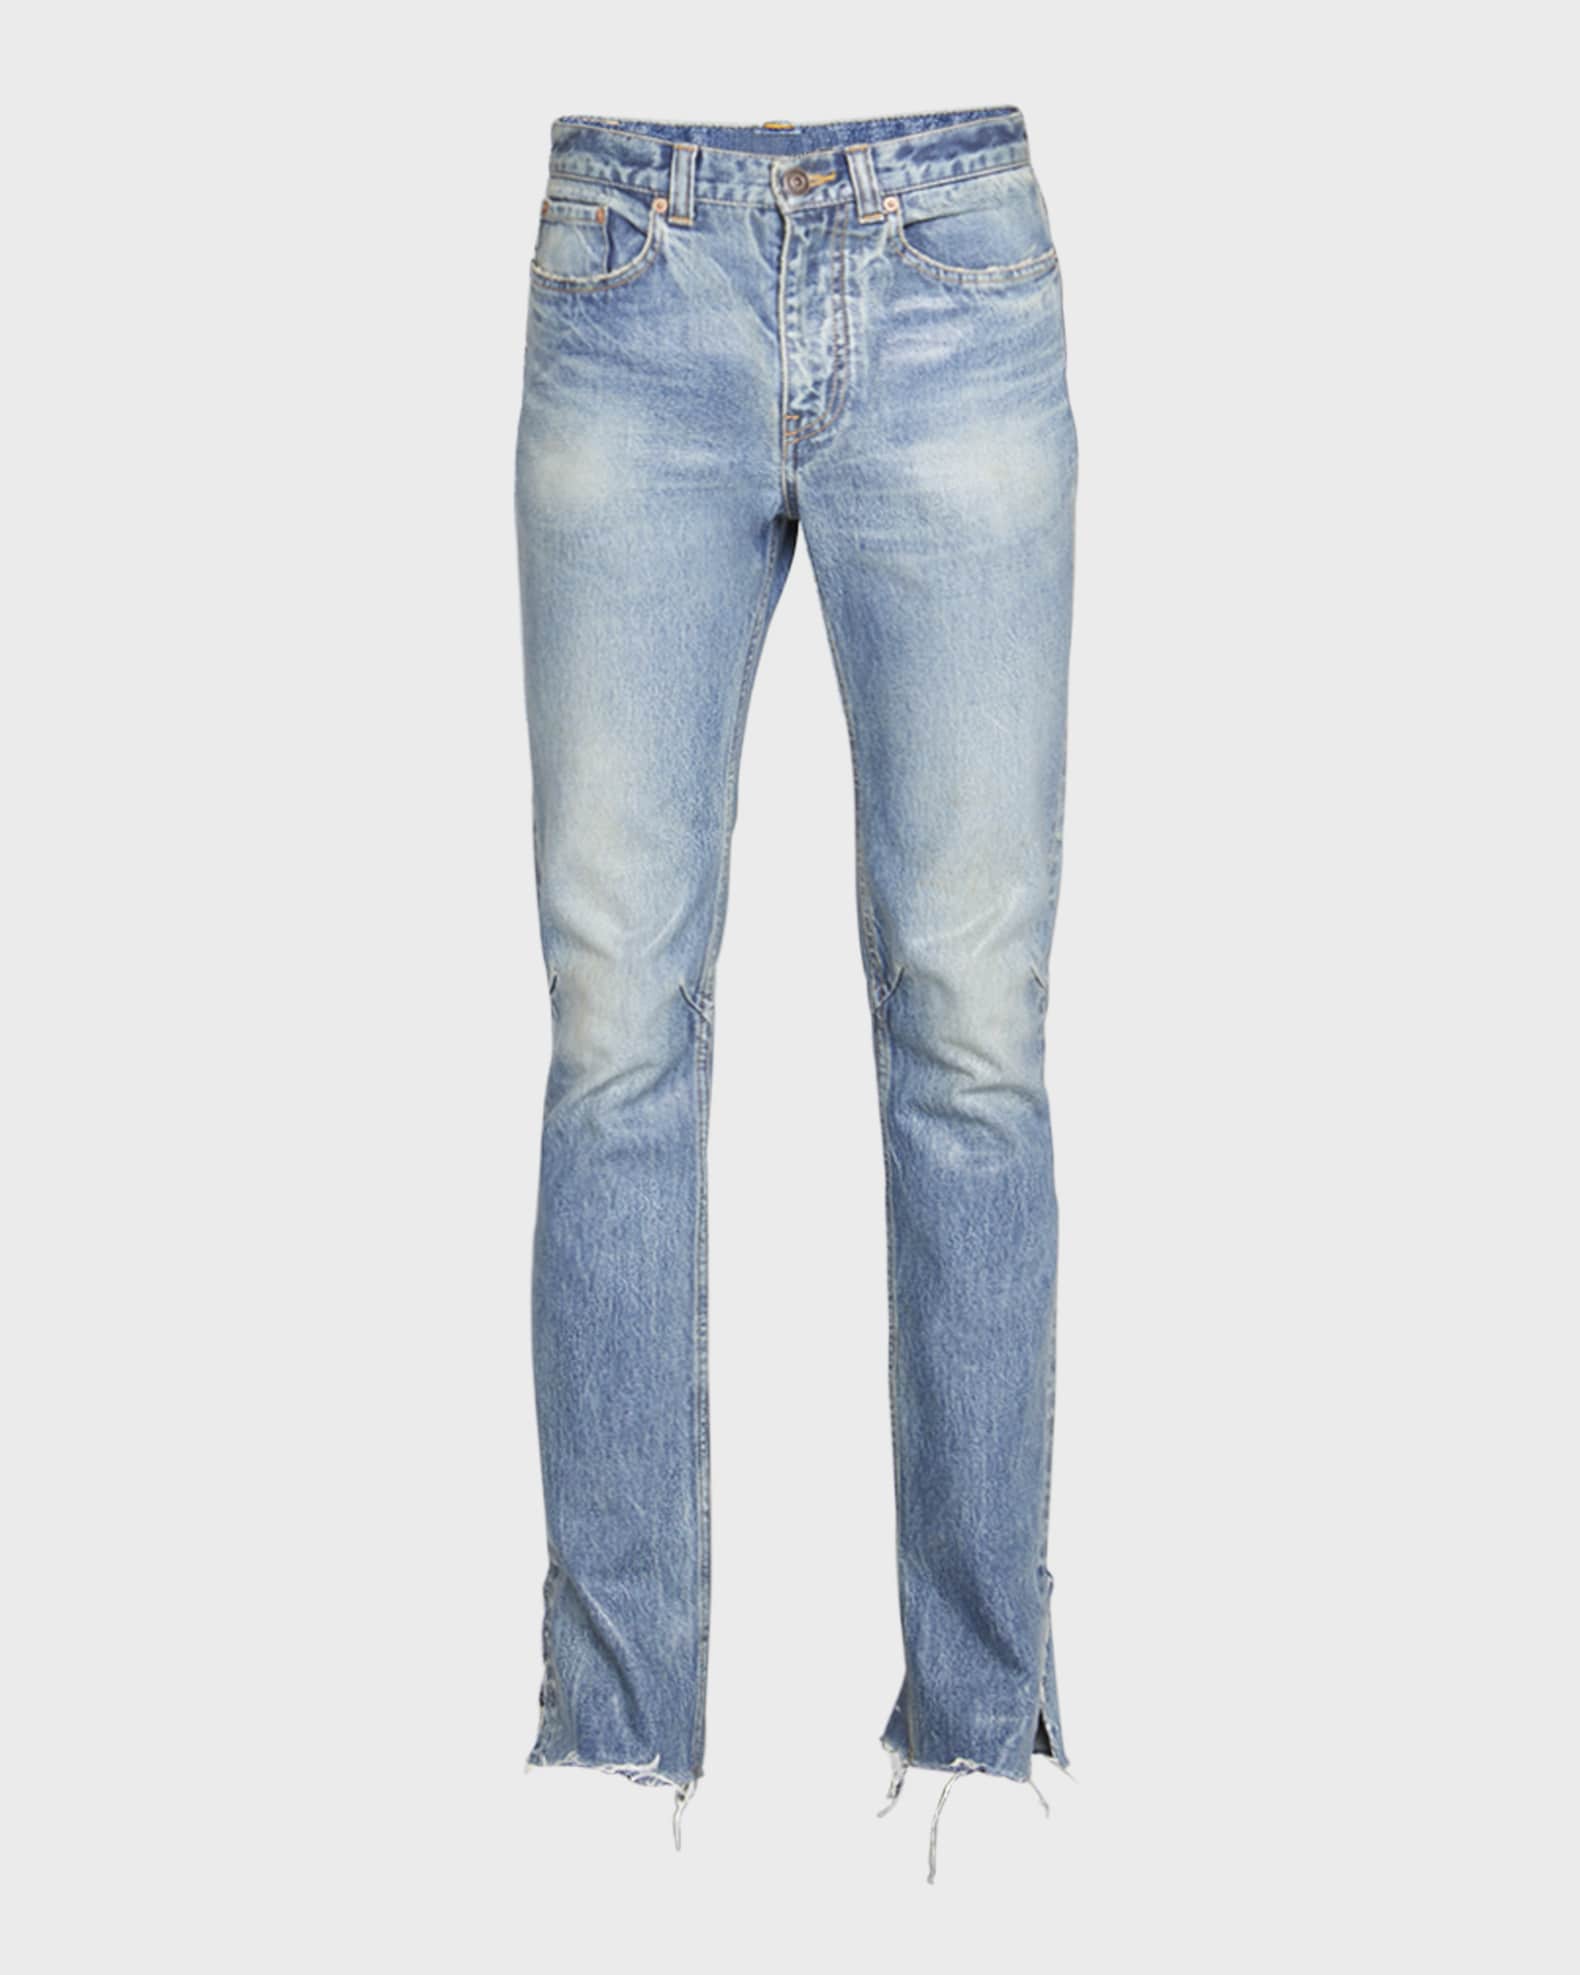 Balenciaga Men's Super Fitted Waxed Jeans | Neiman Marcus